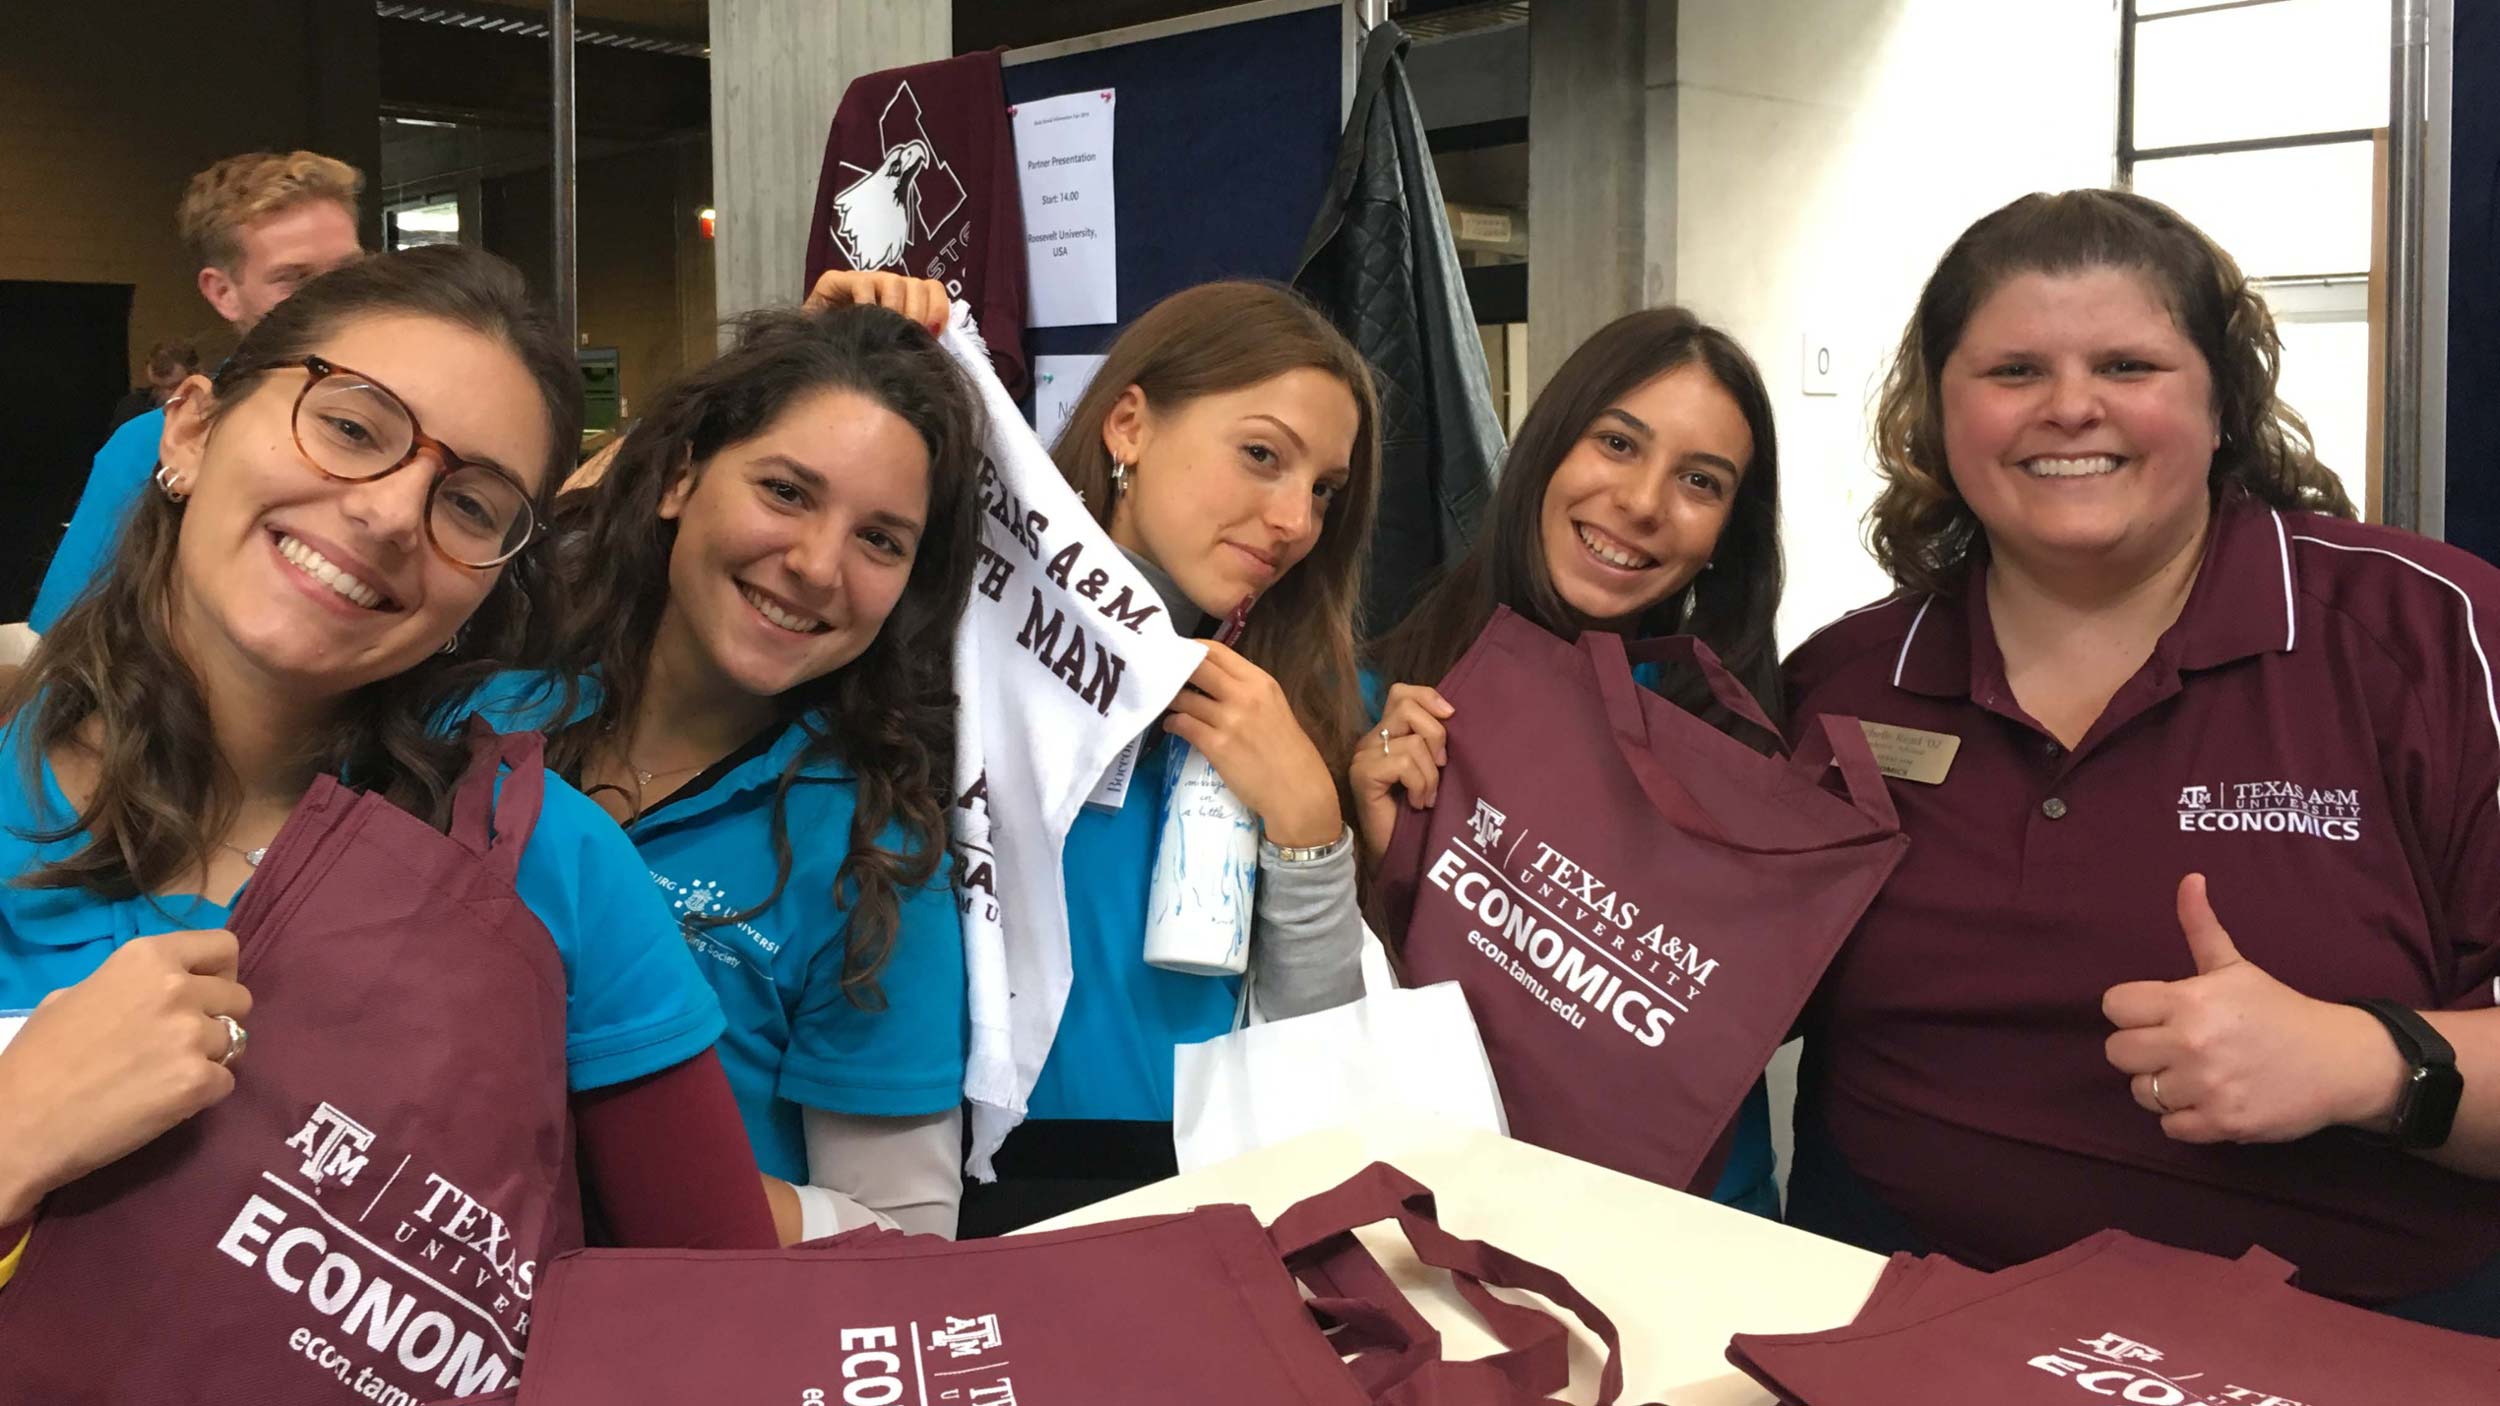 Five economics students pose with their department swag, such as tote bags and 12th man towels